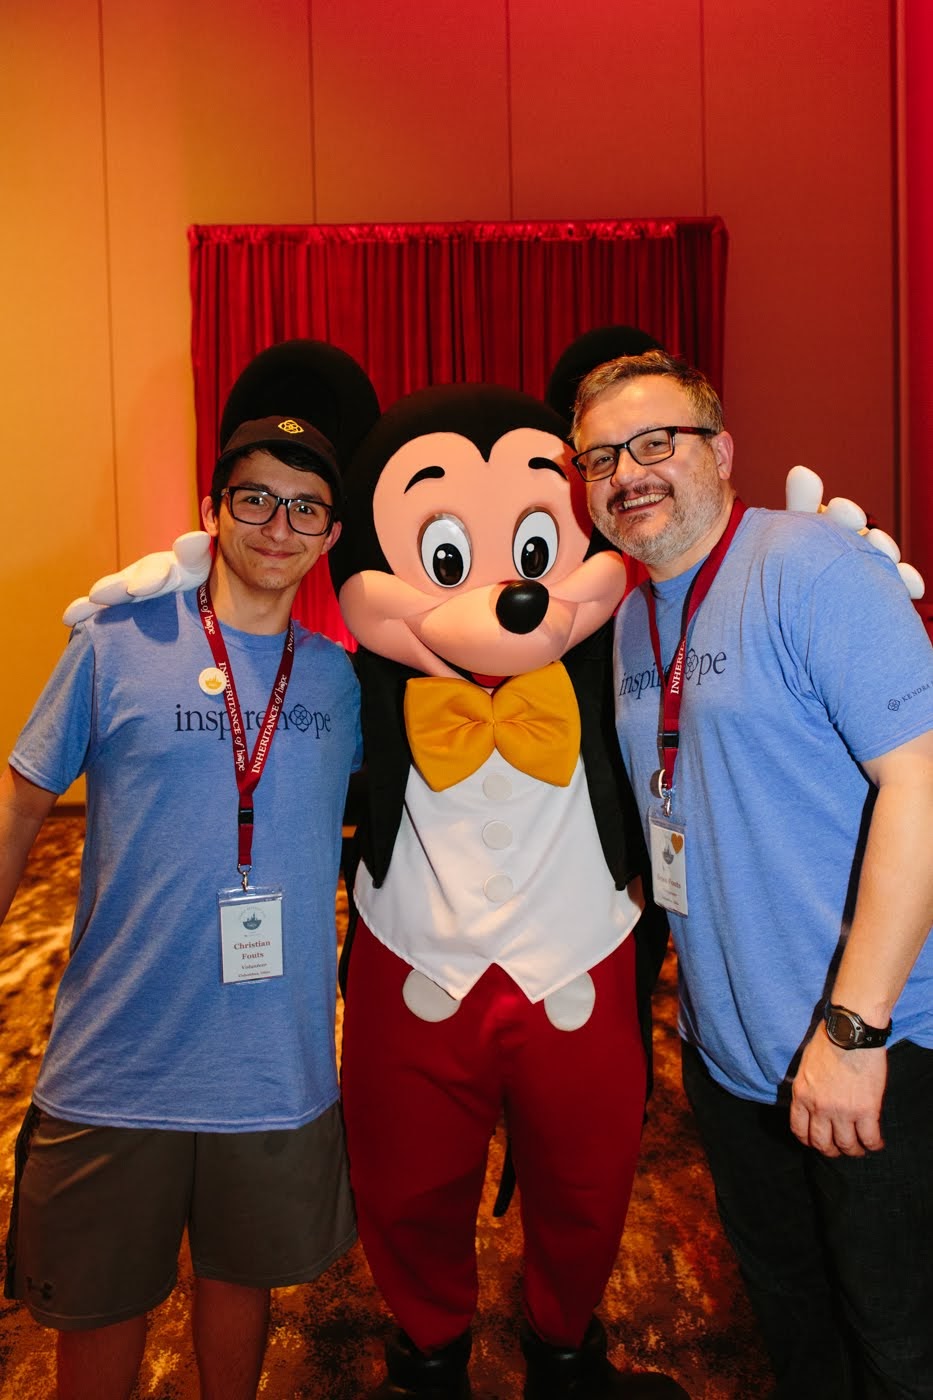 Sean and son, Christian, with a very famous mouse